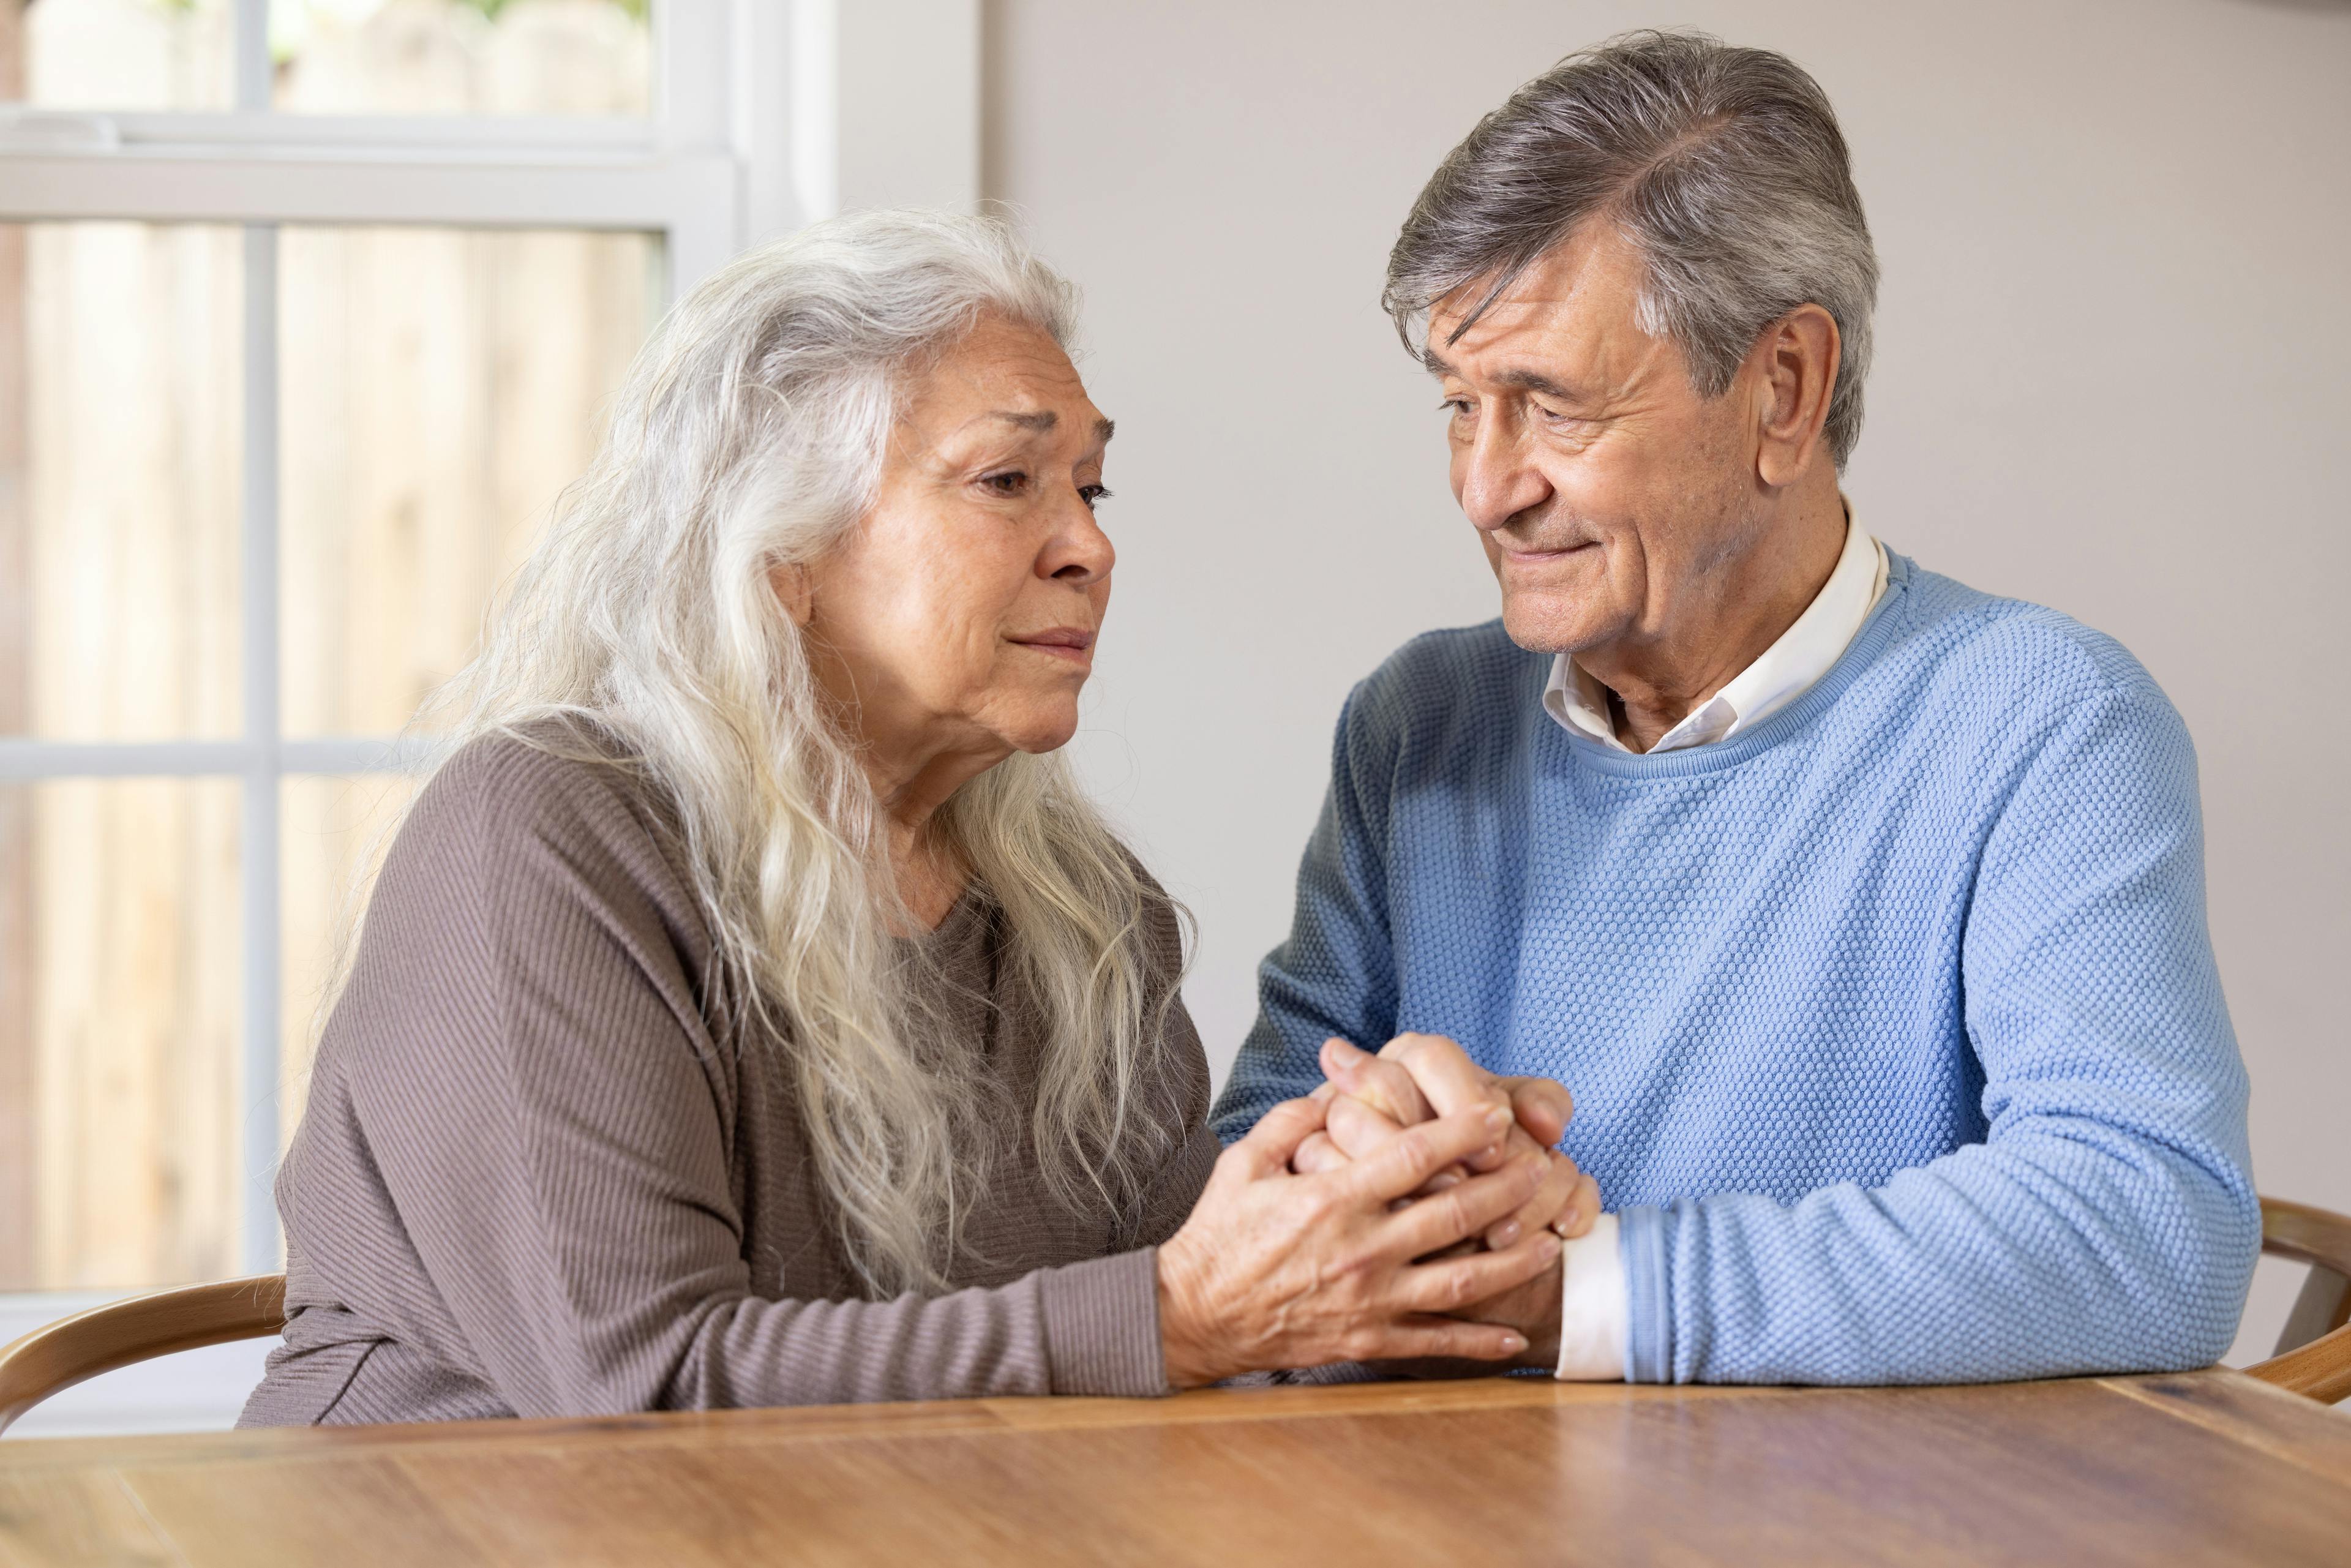 How to Choose Care For a Loved One With Alzheimer’s